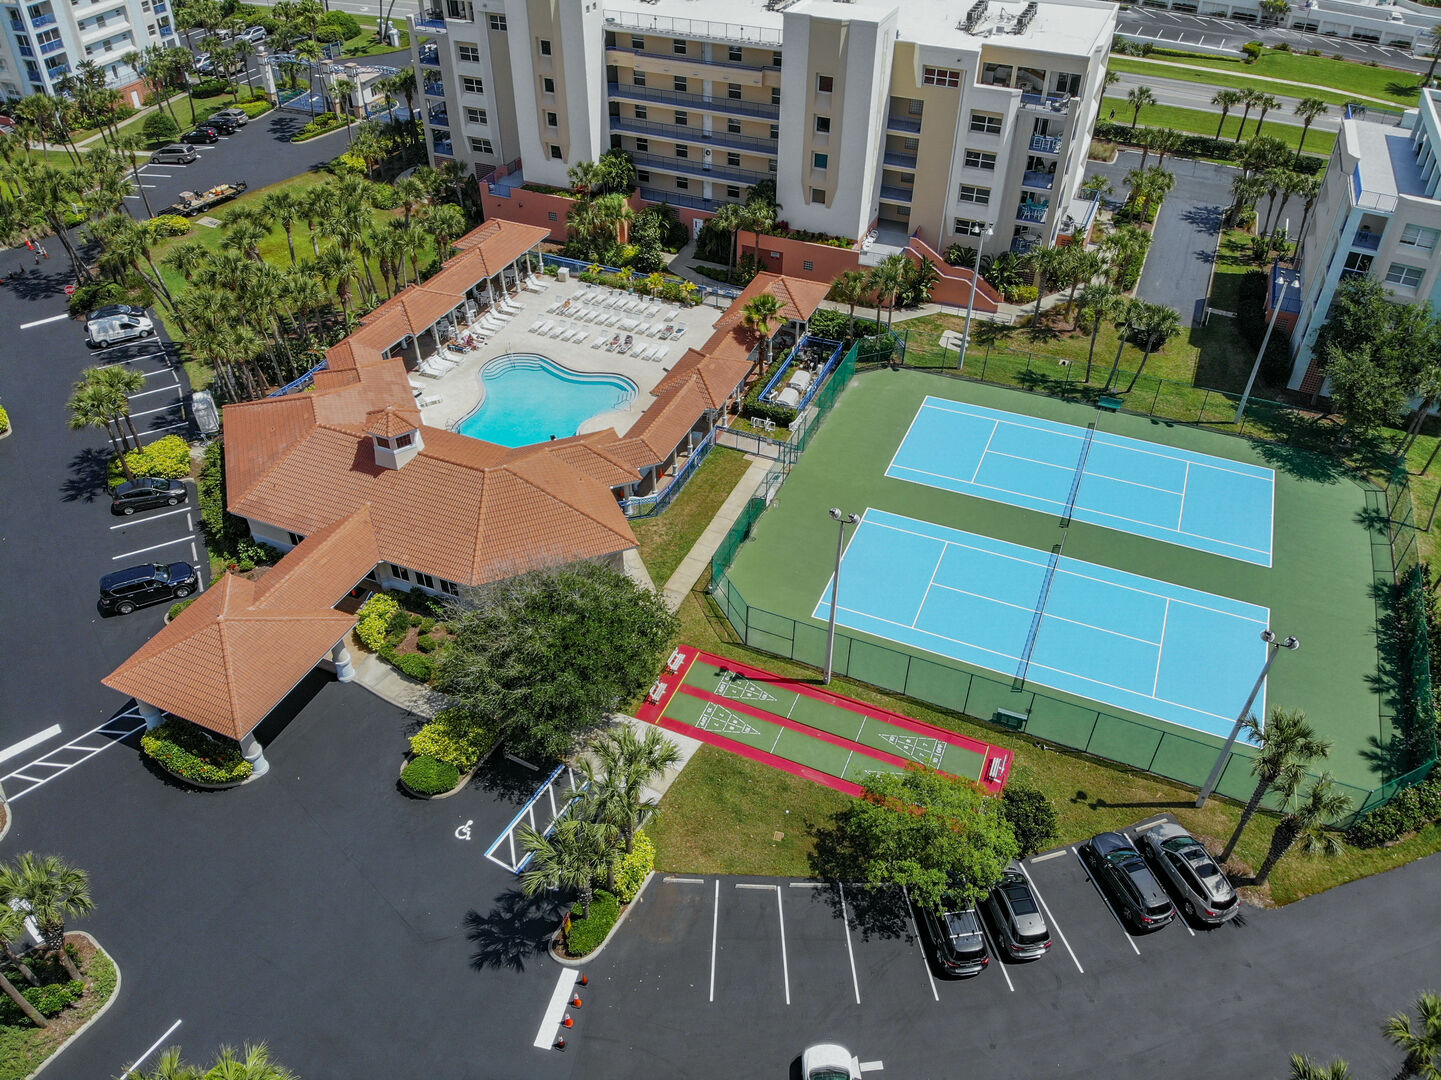 Two tennis courts and a swimming pool